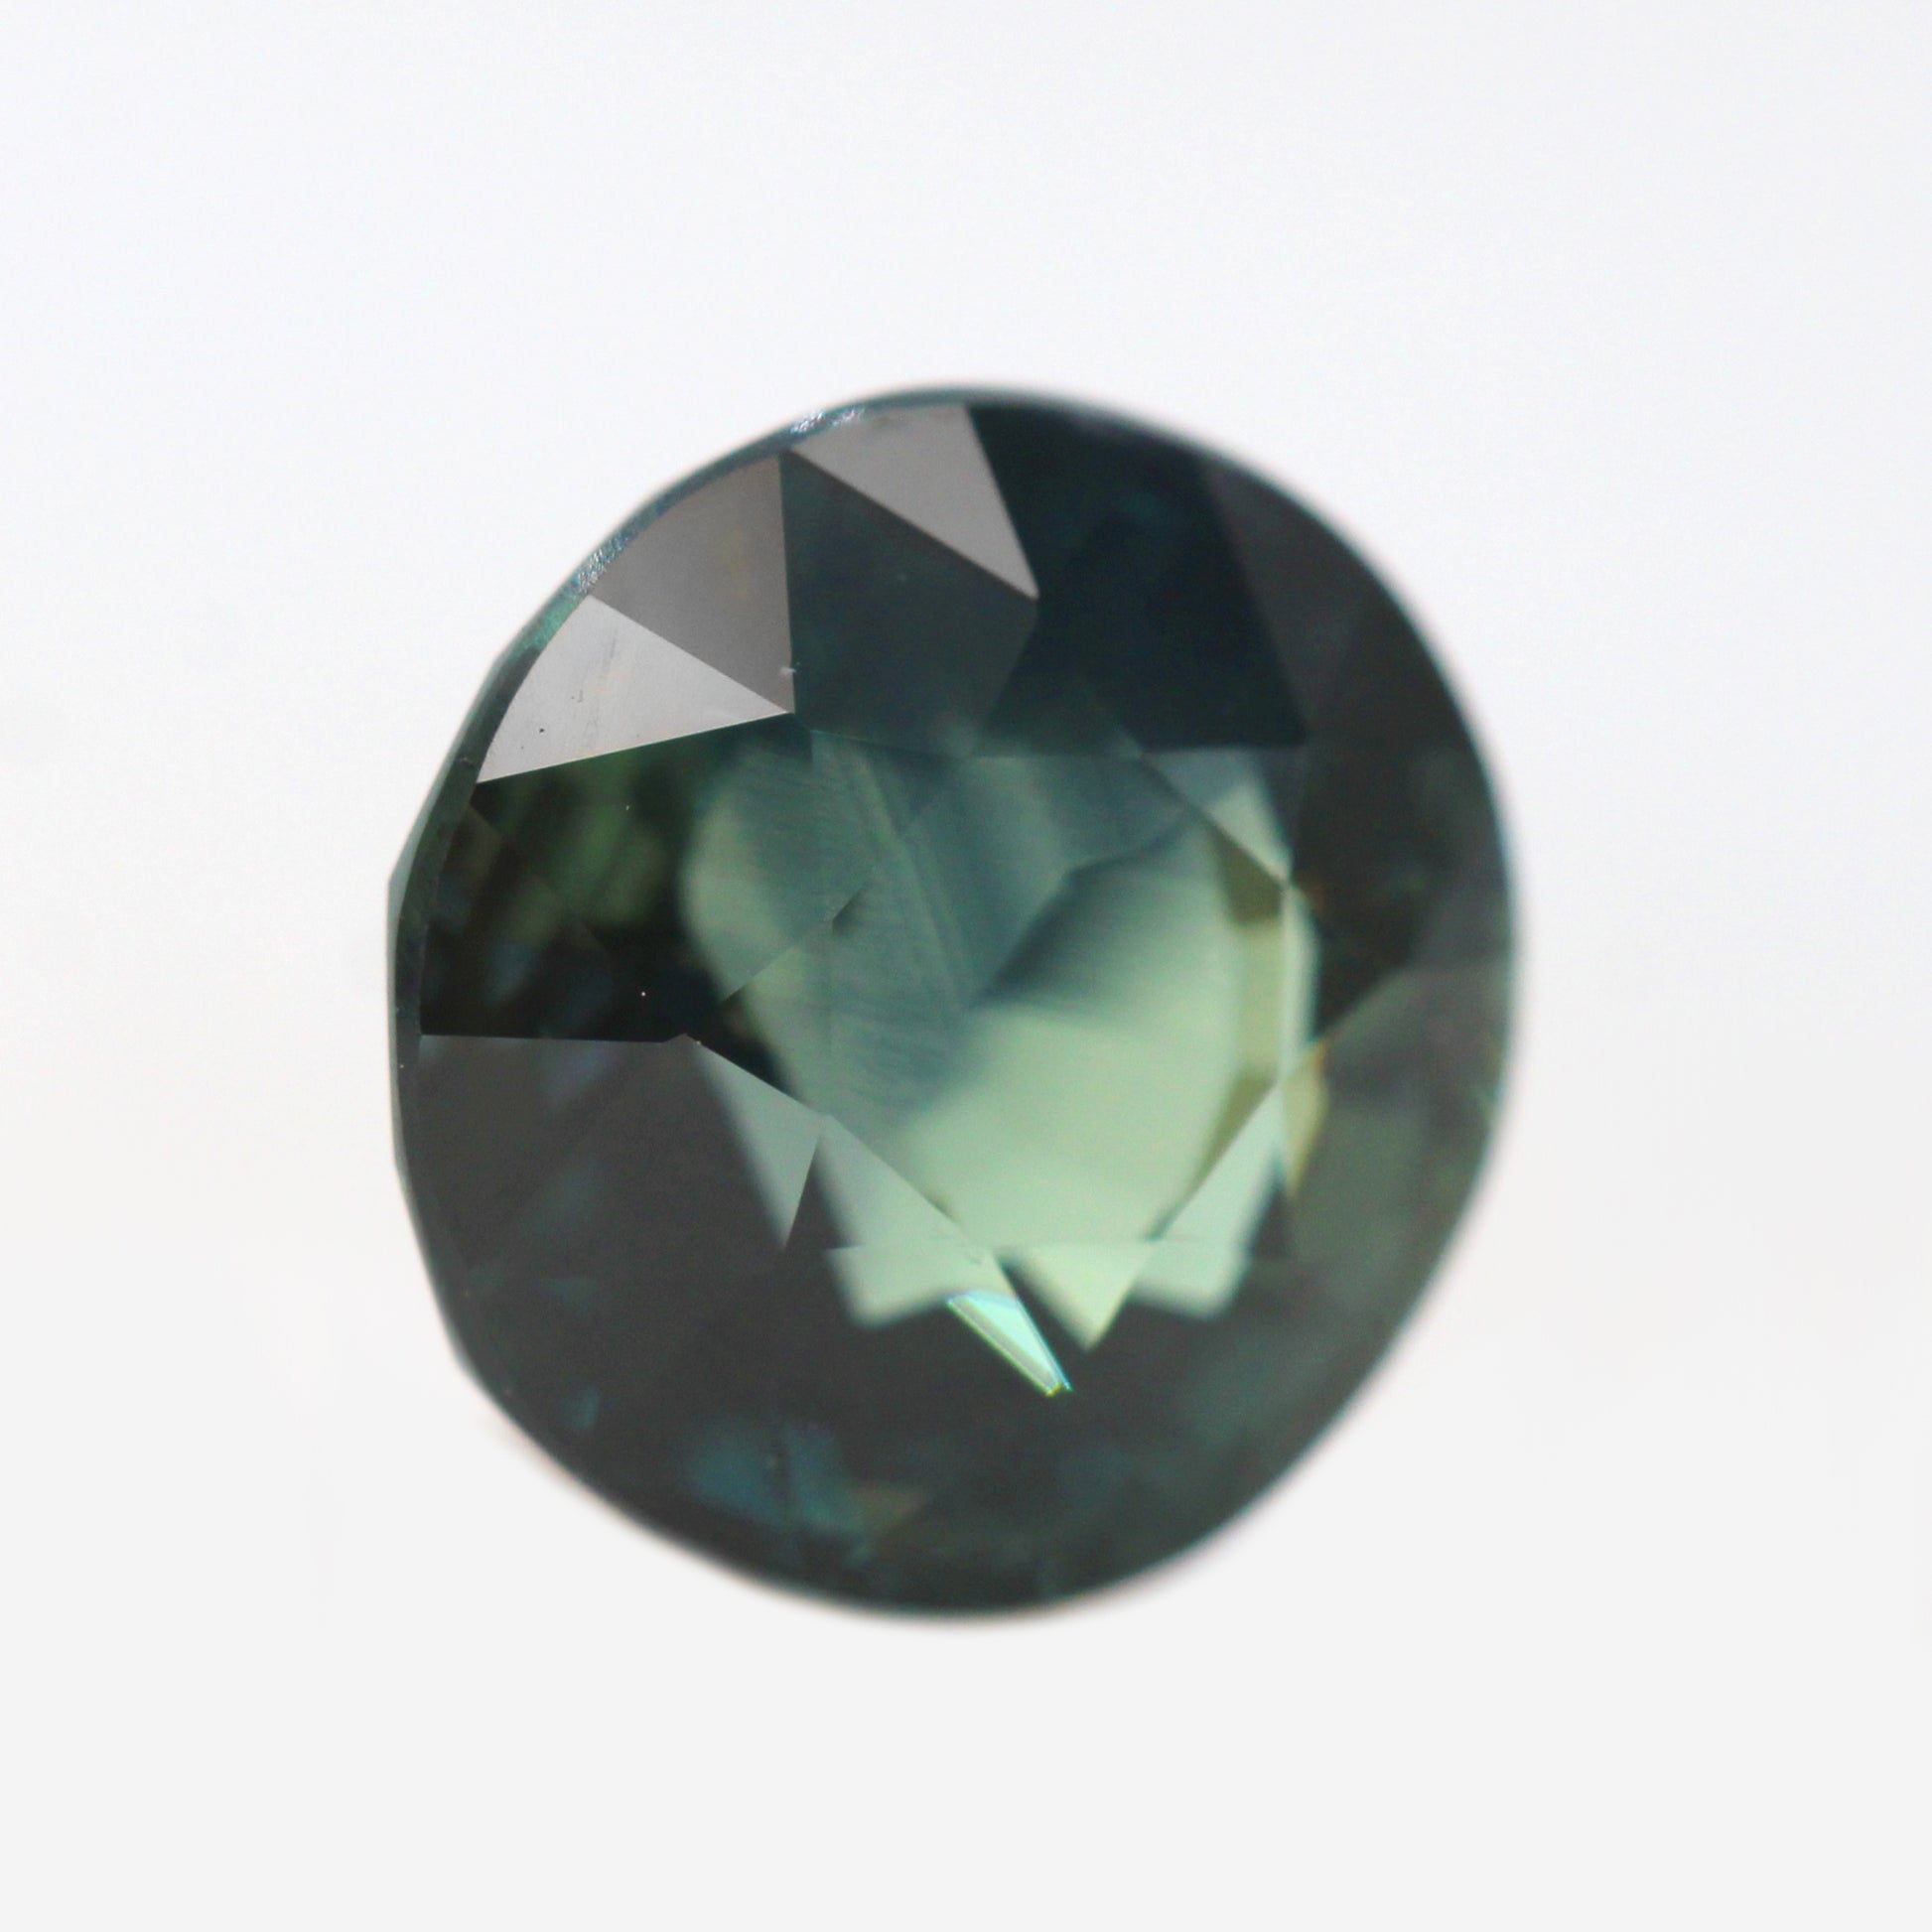 3.03 Carat Round Dark Teal Sapphire for Custom Work - Inventory Code RTS303 - Midwinter Co. Alternative Bridal Rings and Modern Fine Jewelry